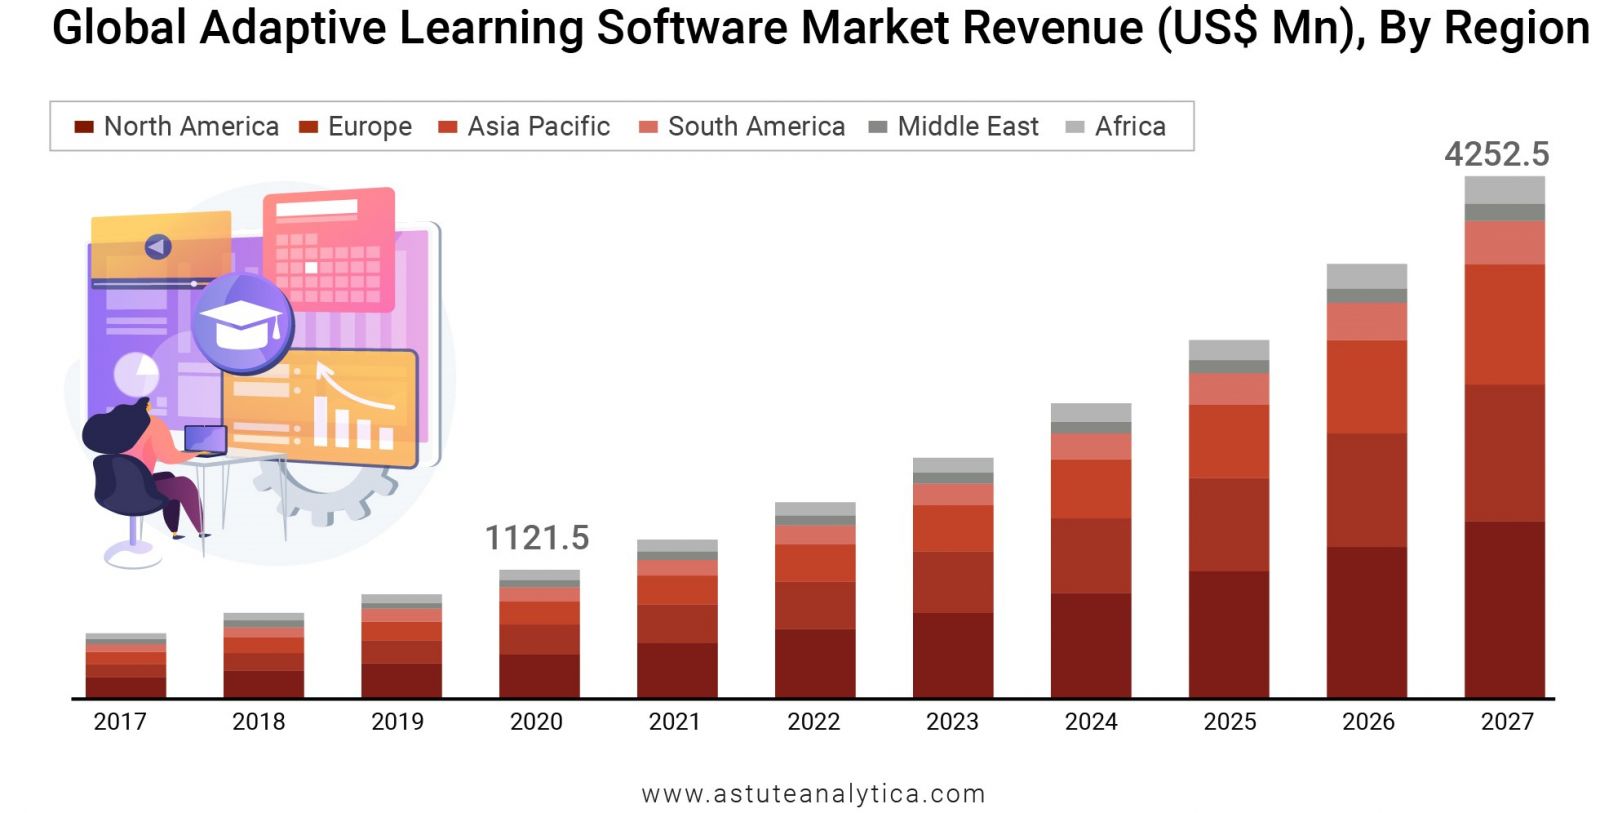 Adaptive Learning Software Market - Geographical overview